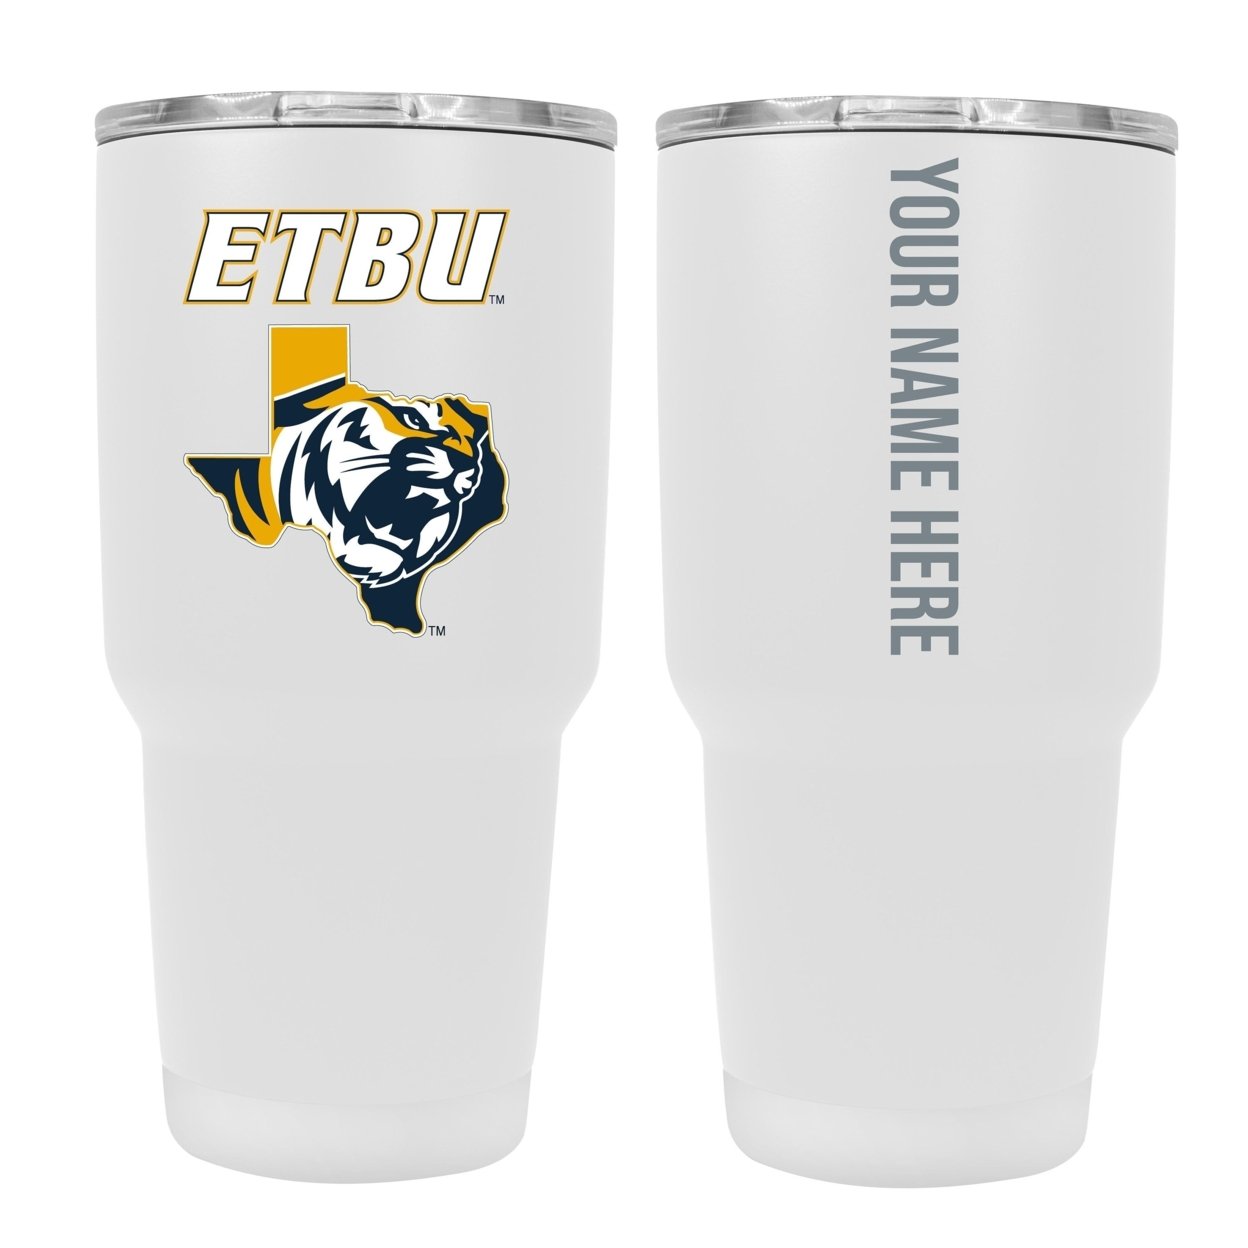 Collegiate Custom Personalized East Texas Baptist University, 24 Oz Insulated Stainless Steel Tumbler With Engraved Name - White